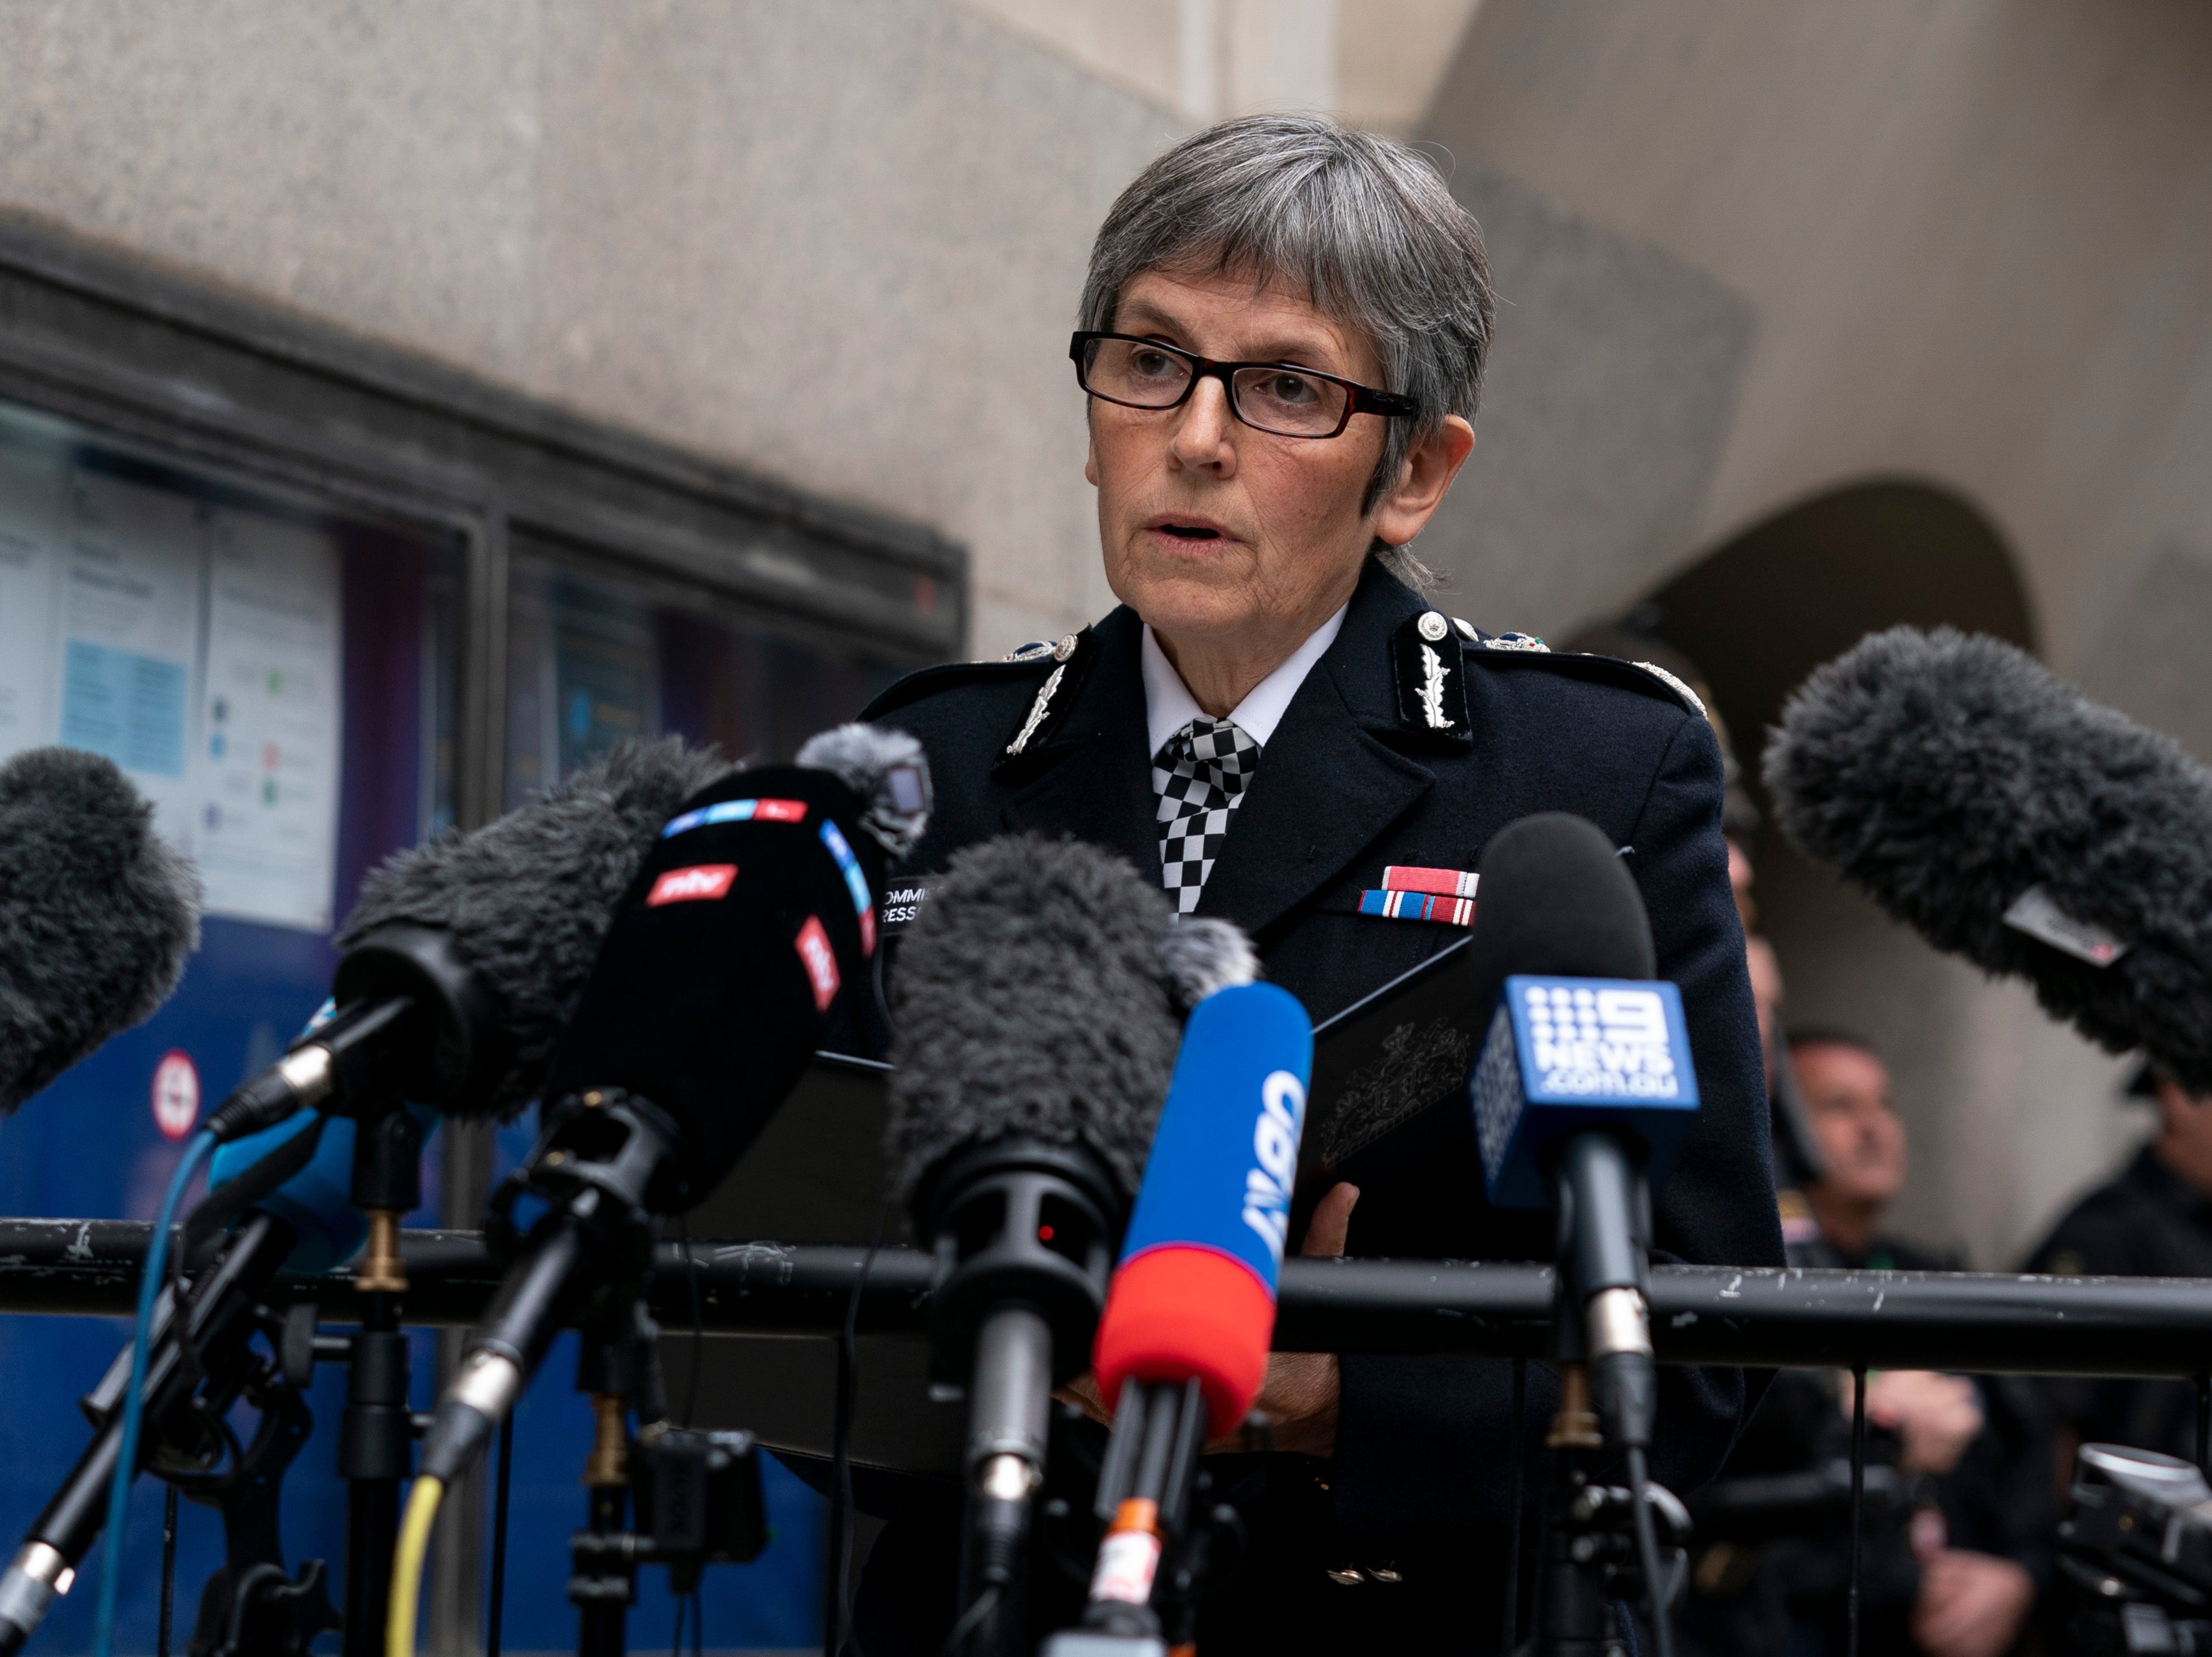 Metropolitan Police commissioner Dame Cressida Dick: ‘People will be entitled to their opinion, I’ve got a job to do, I’m getting on with it’